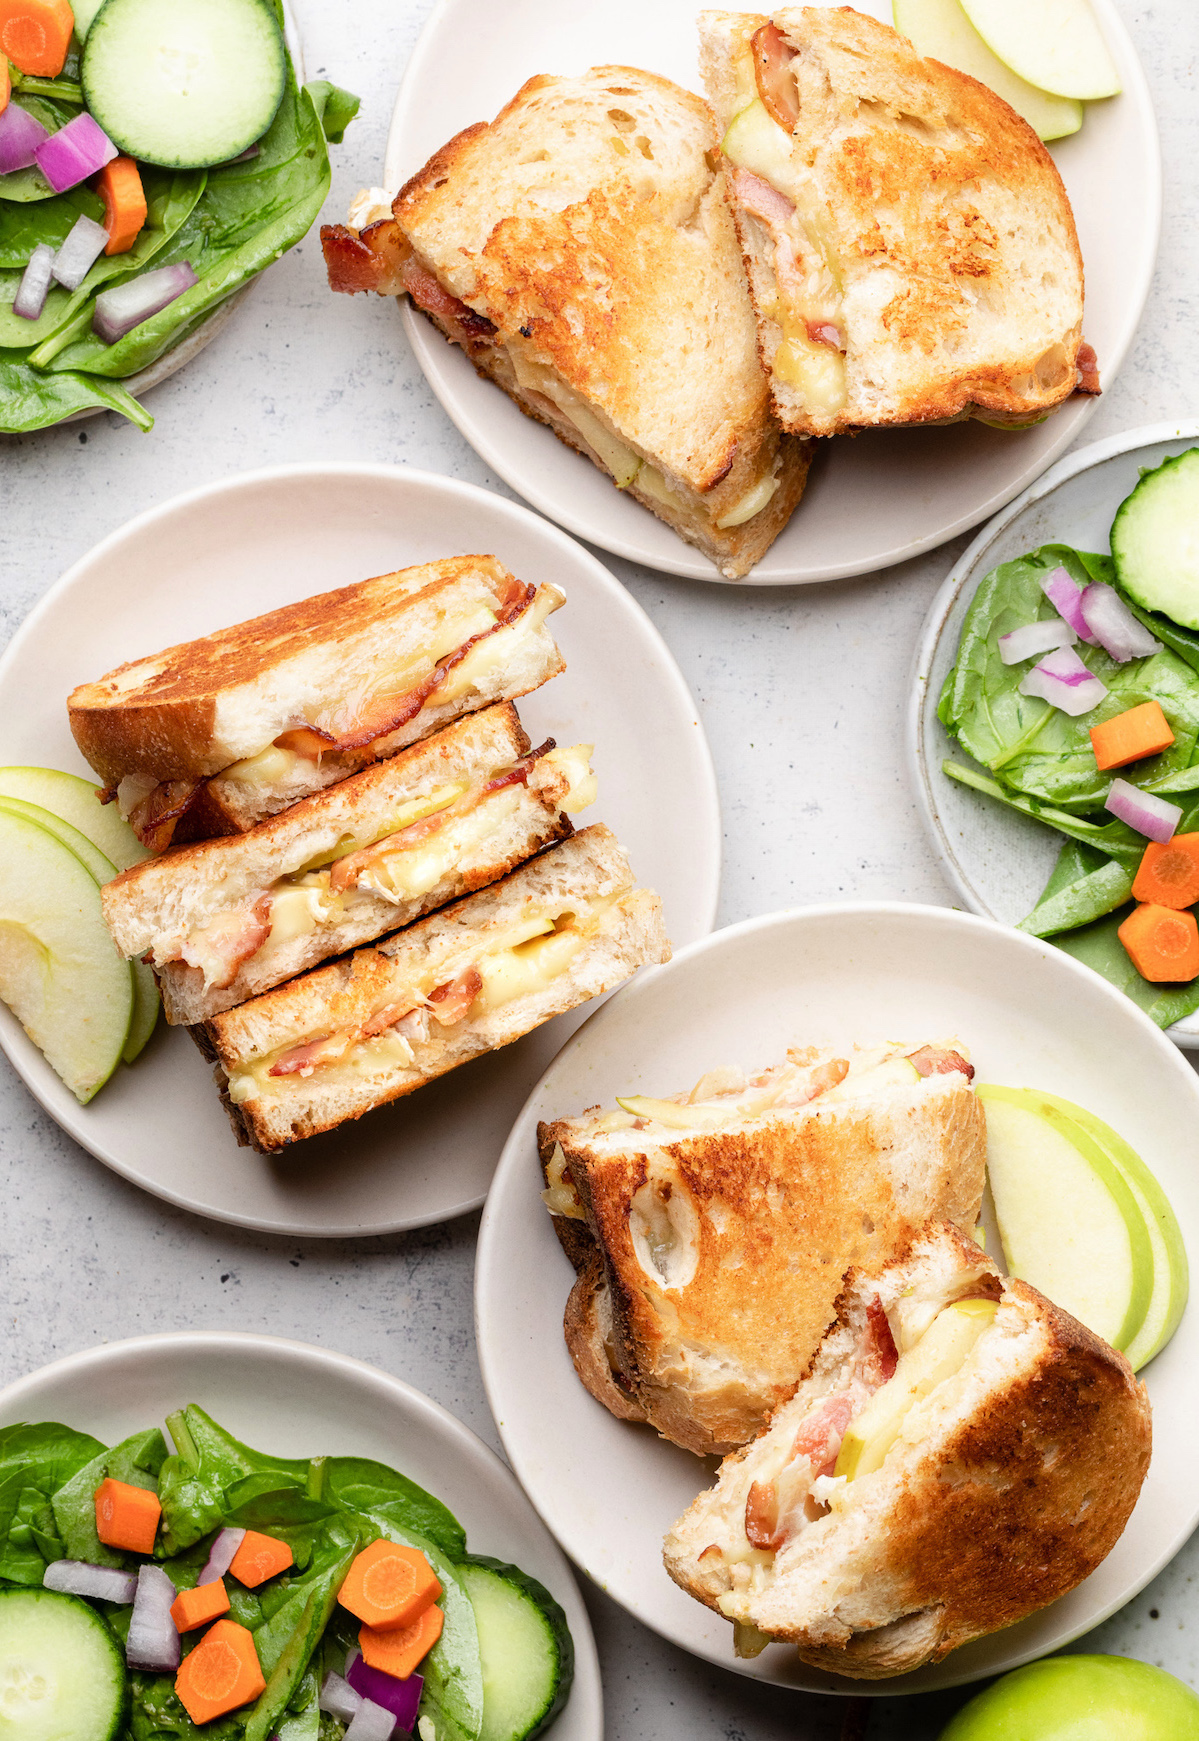 Three grilled cheese sandwiches on small white plates, next to small bowls of green salad.